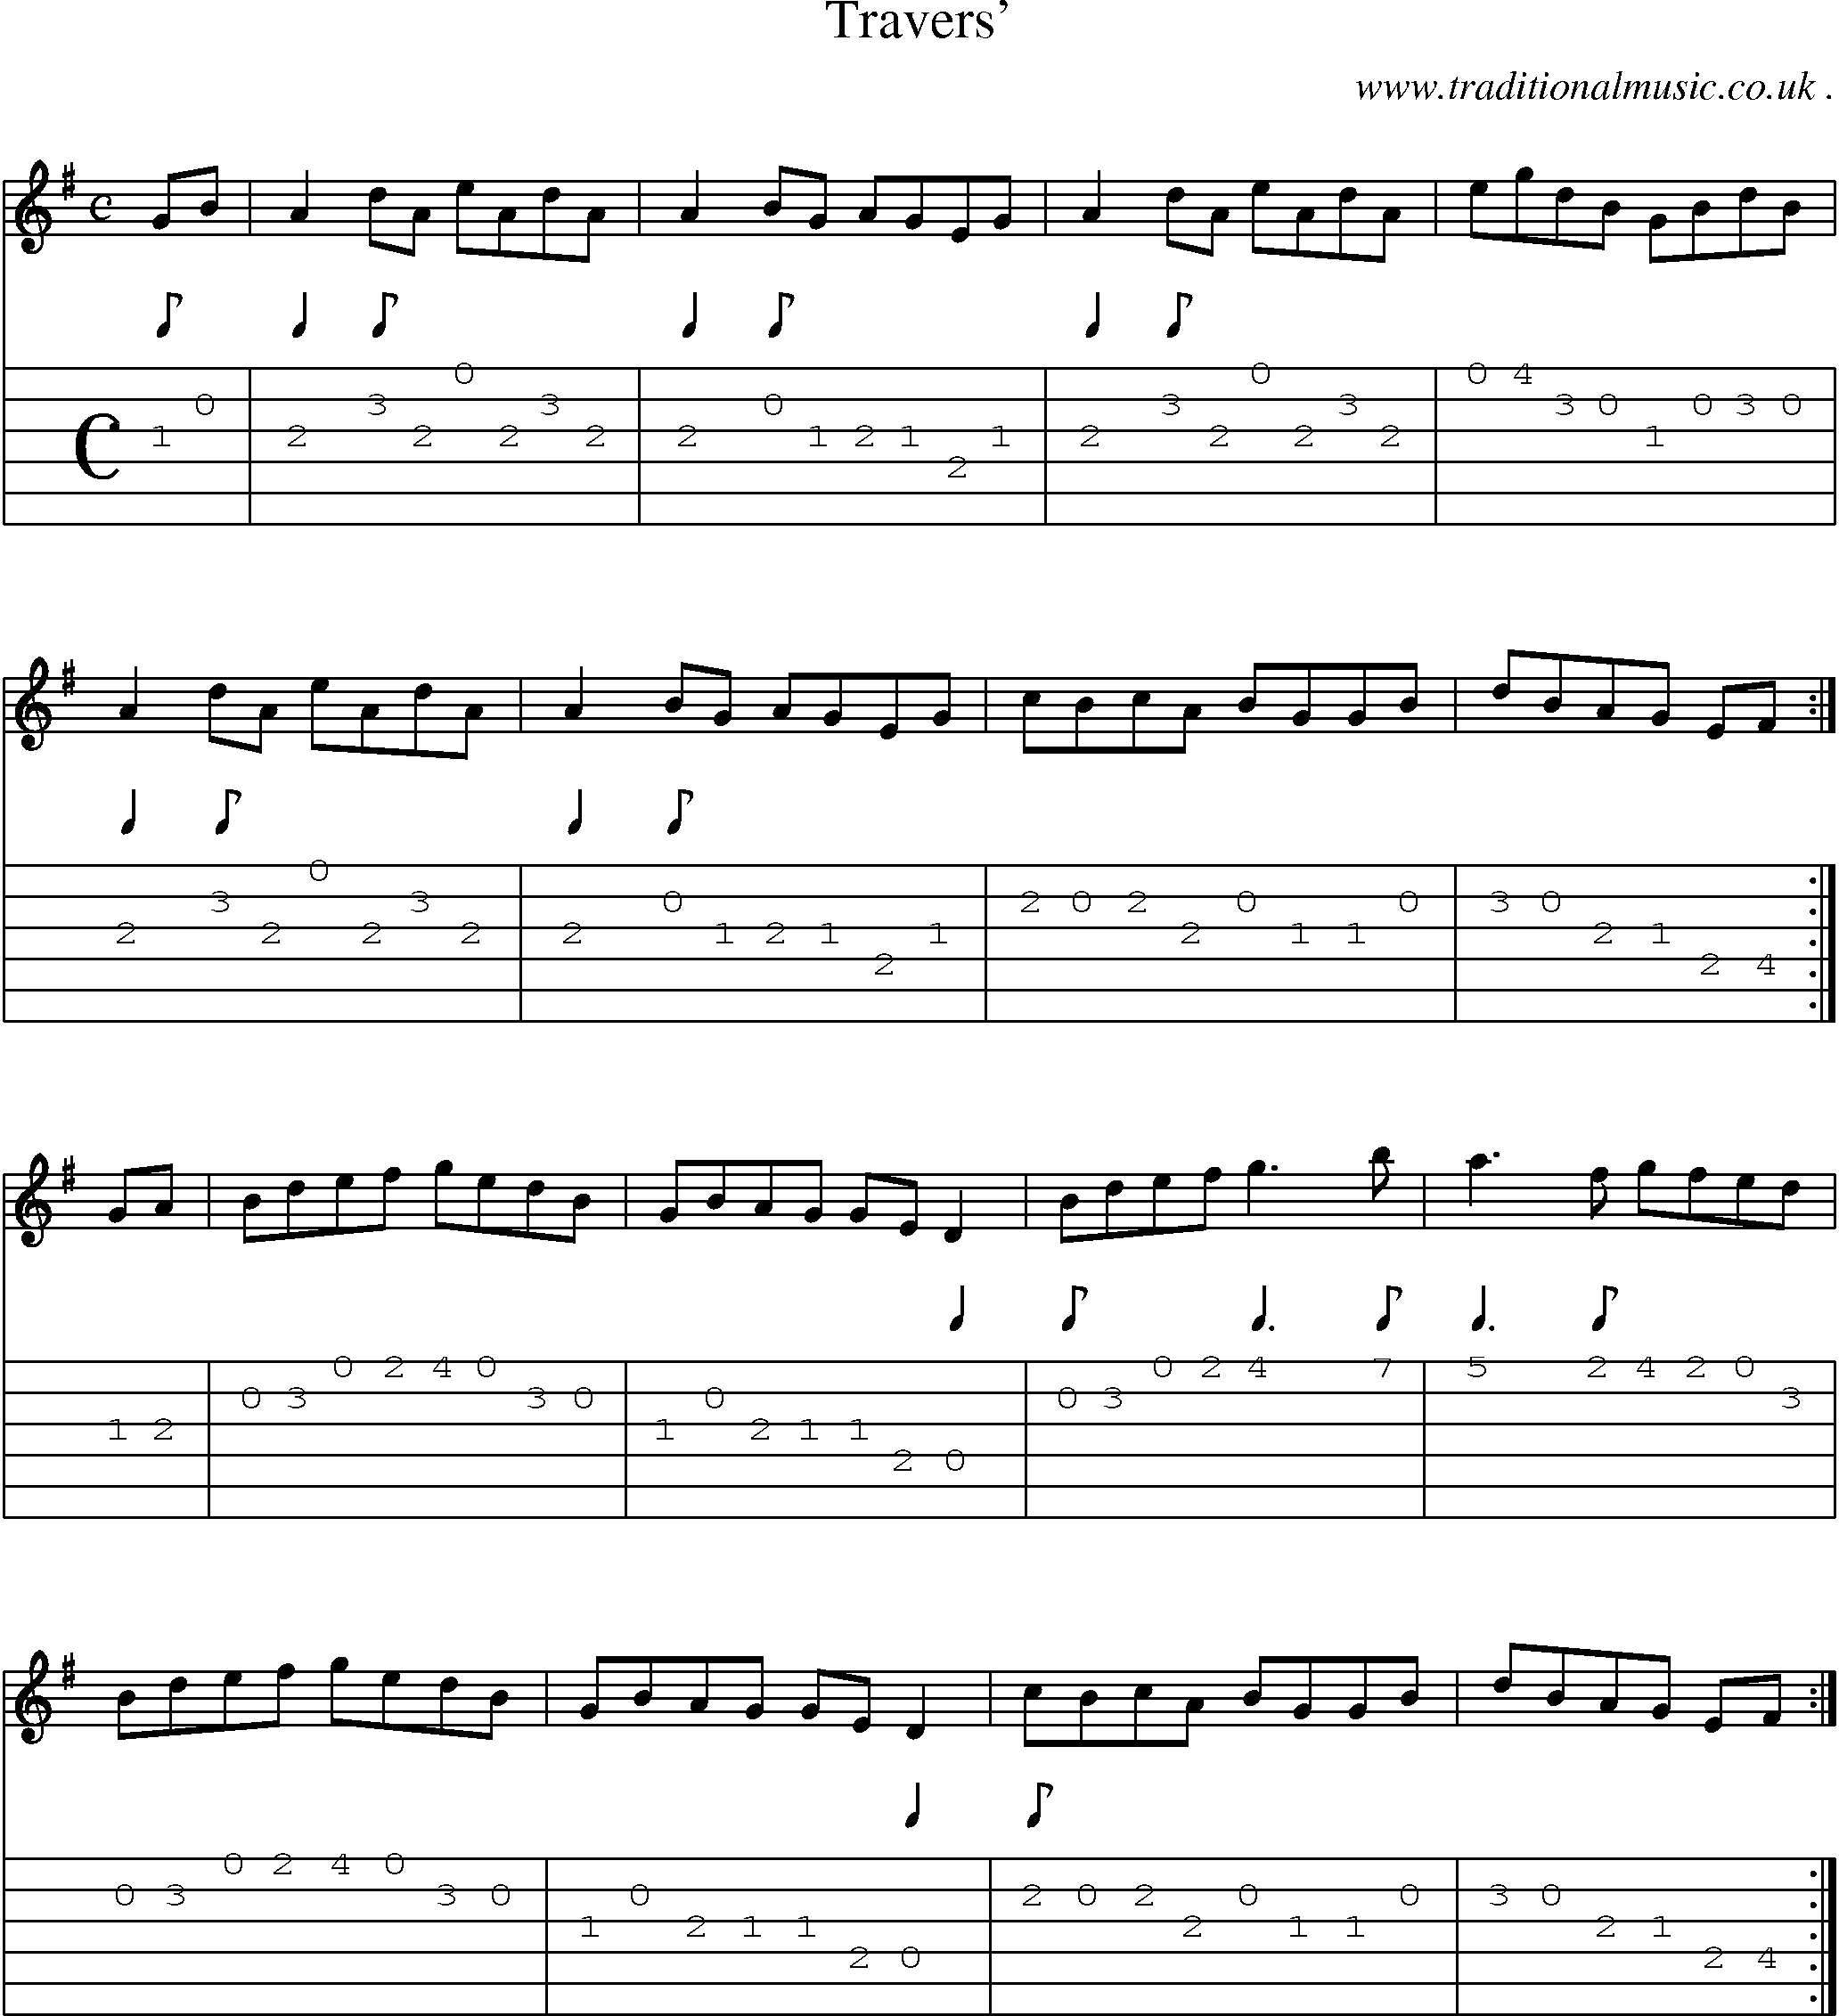 Sheet-Music and Guitar Tabs for Travers1